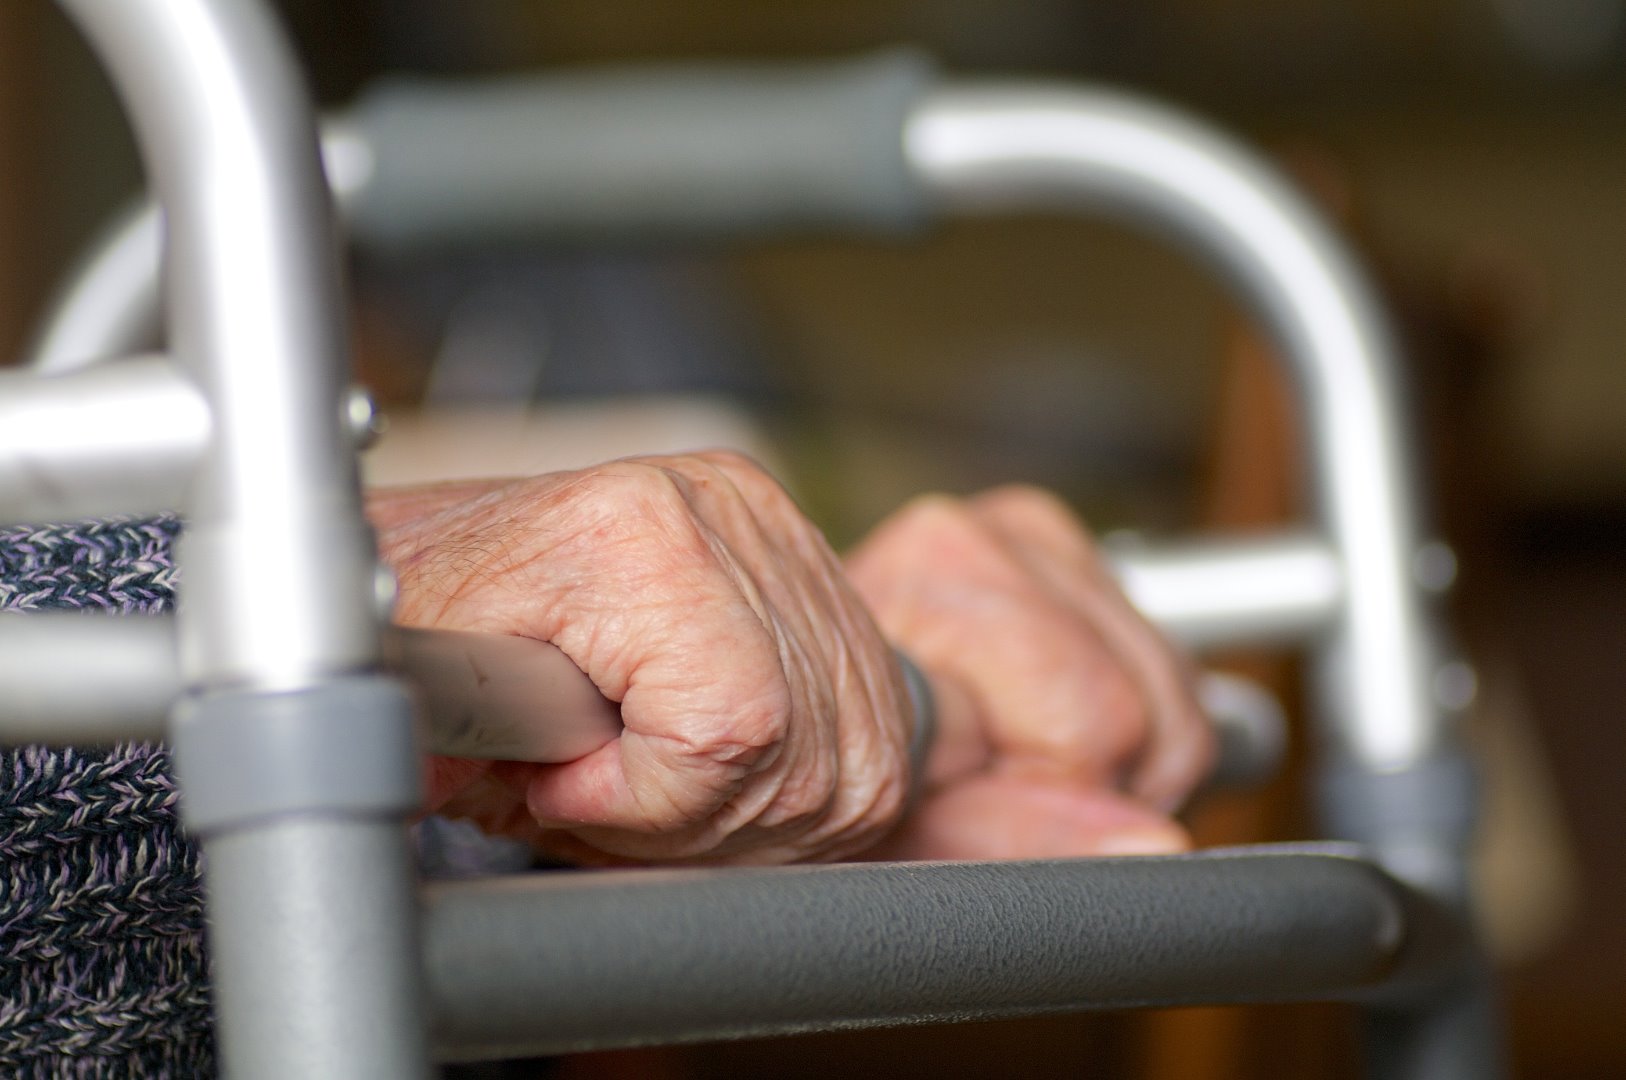 PIC - close up of older hands gripping a zimmer frame